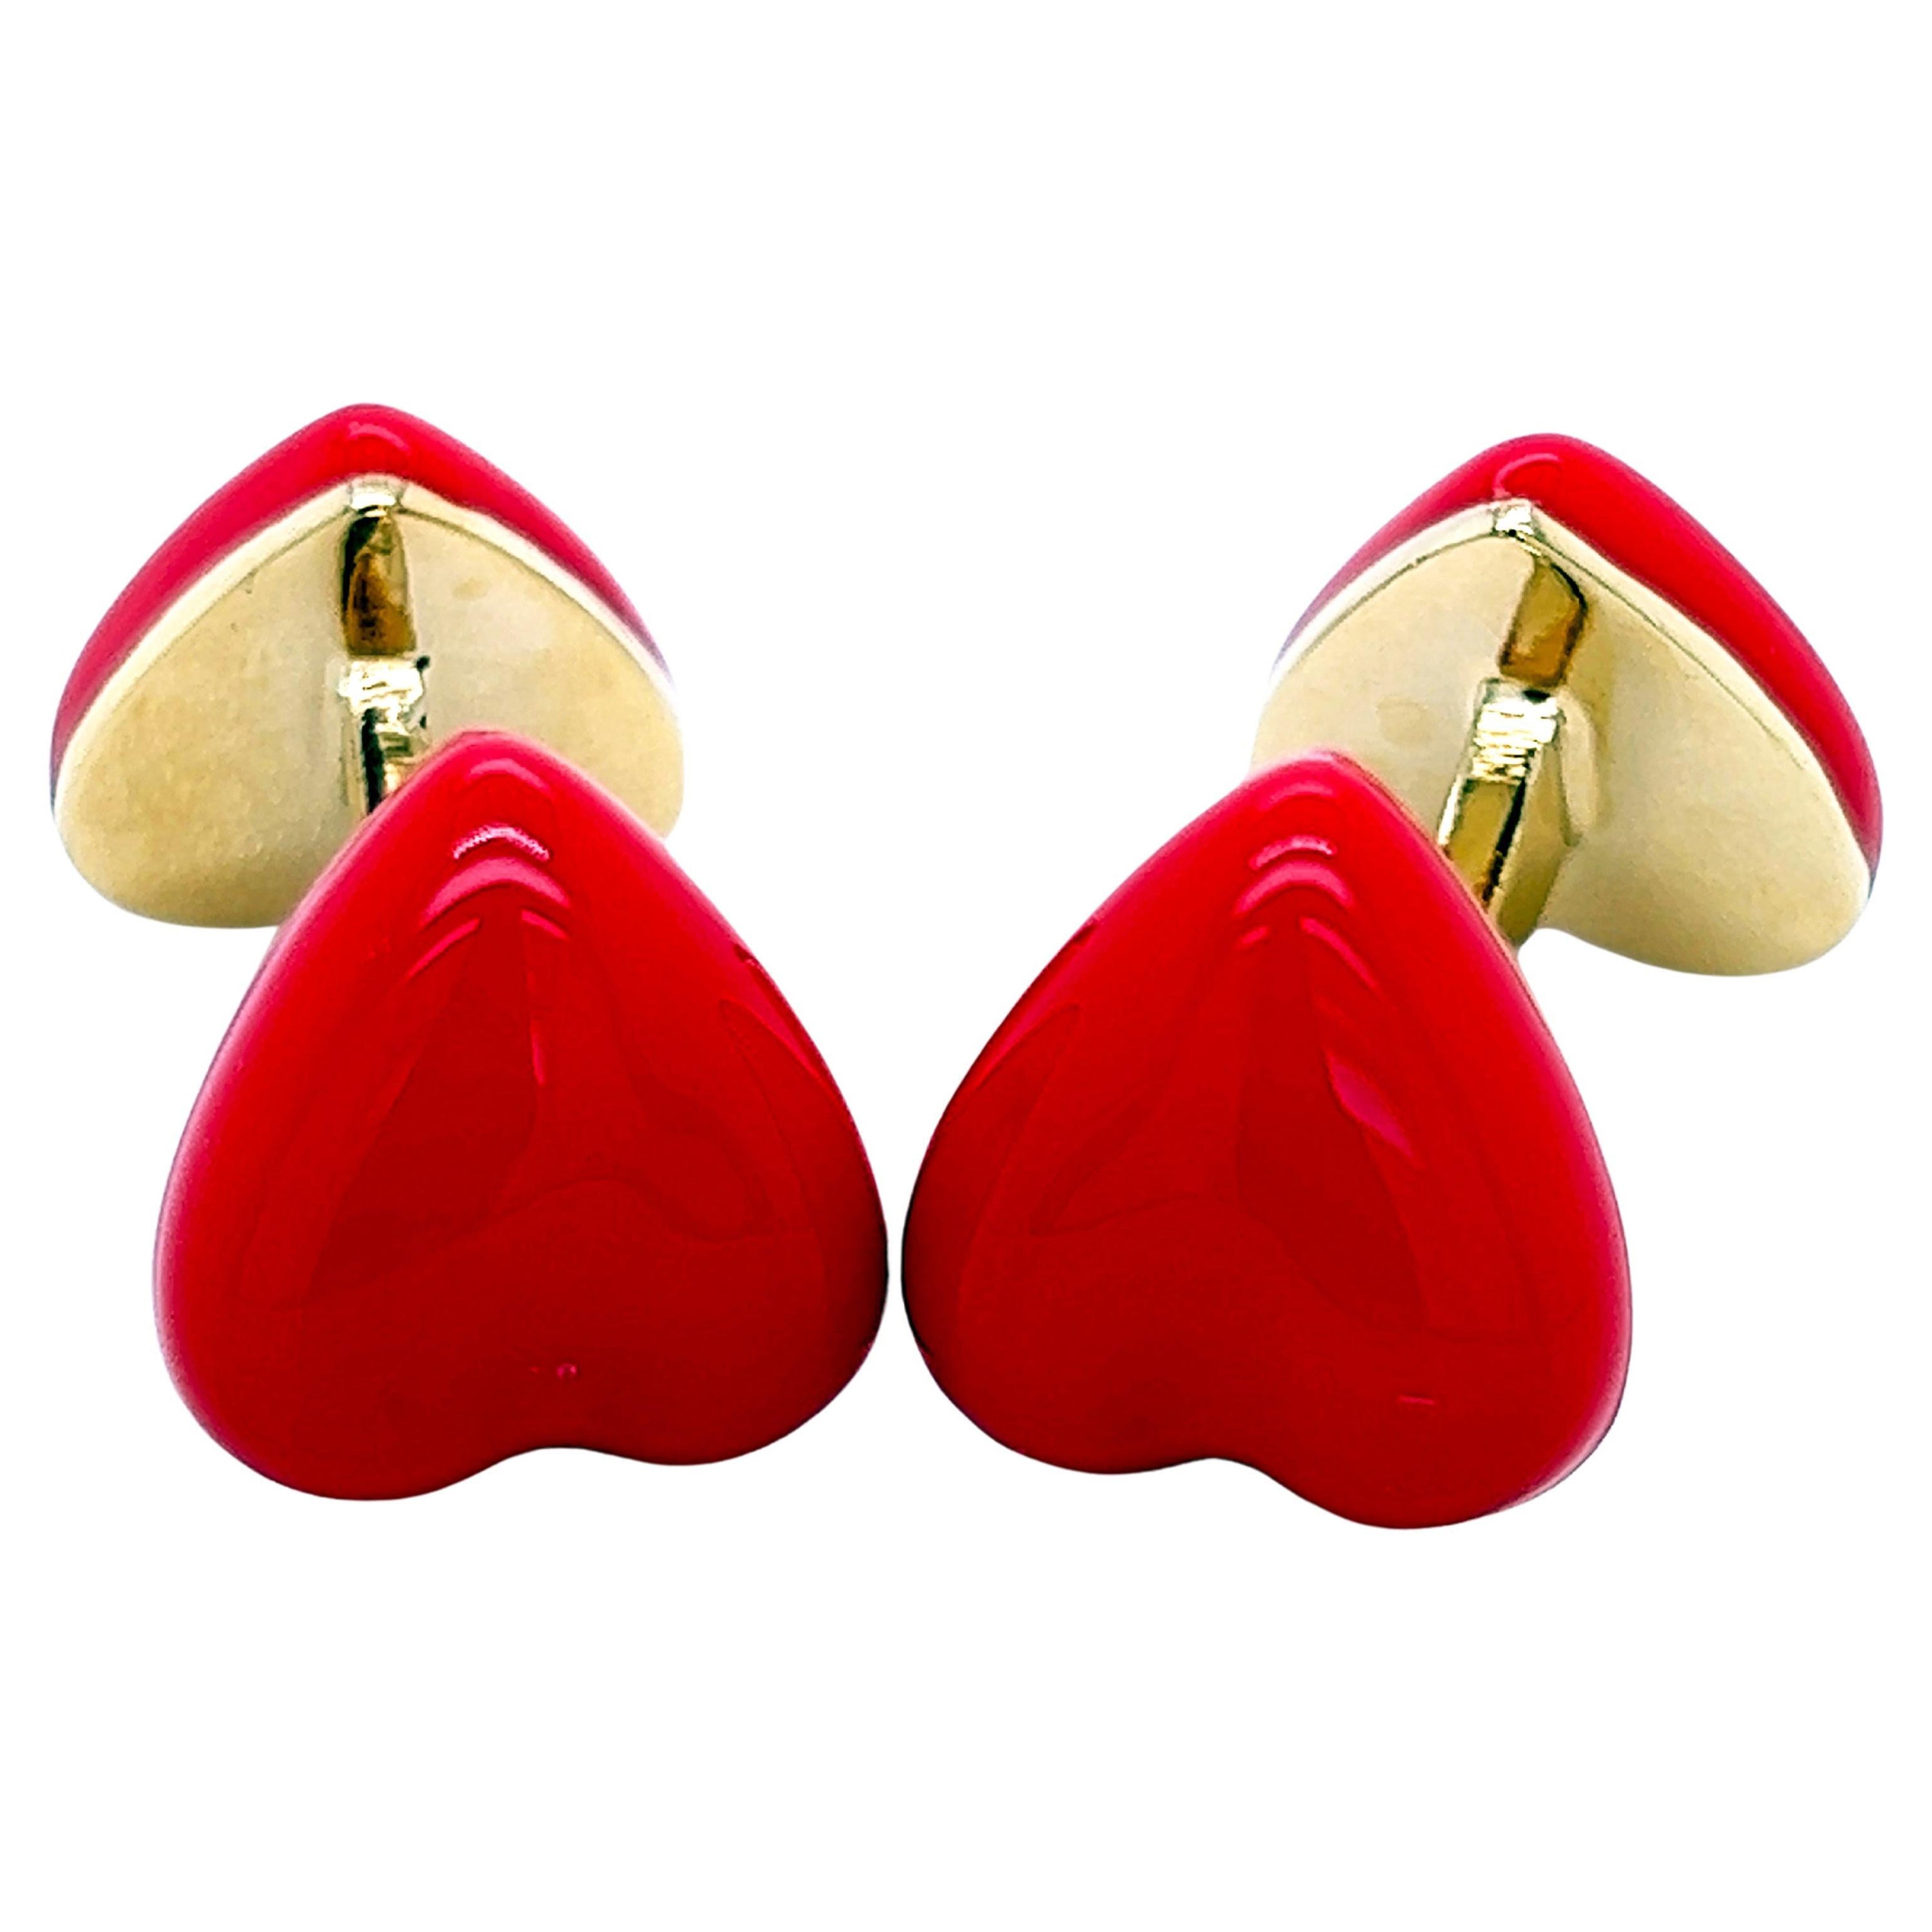 Berca Red Heart Shaped Hand Enamelled Sterling Silver Gold Plated Cufflinks